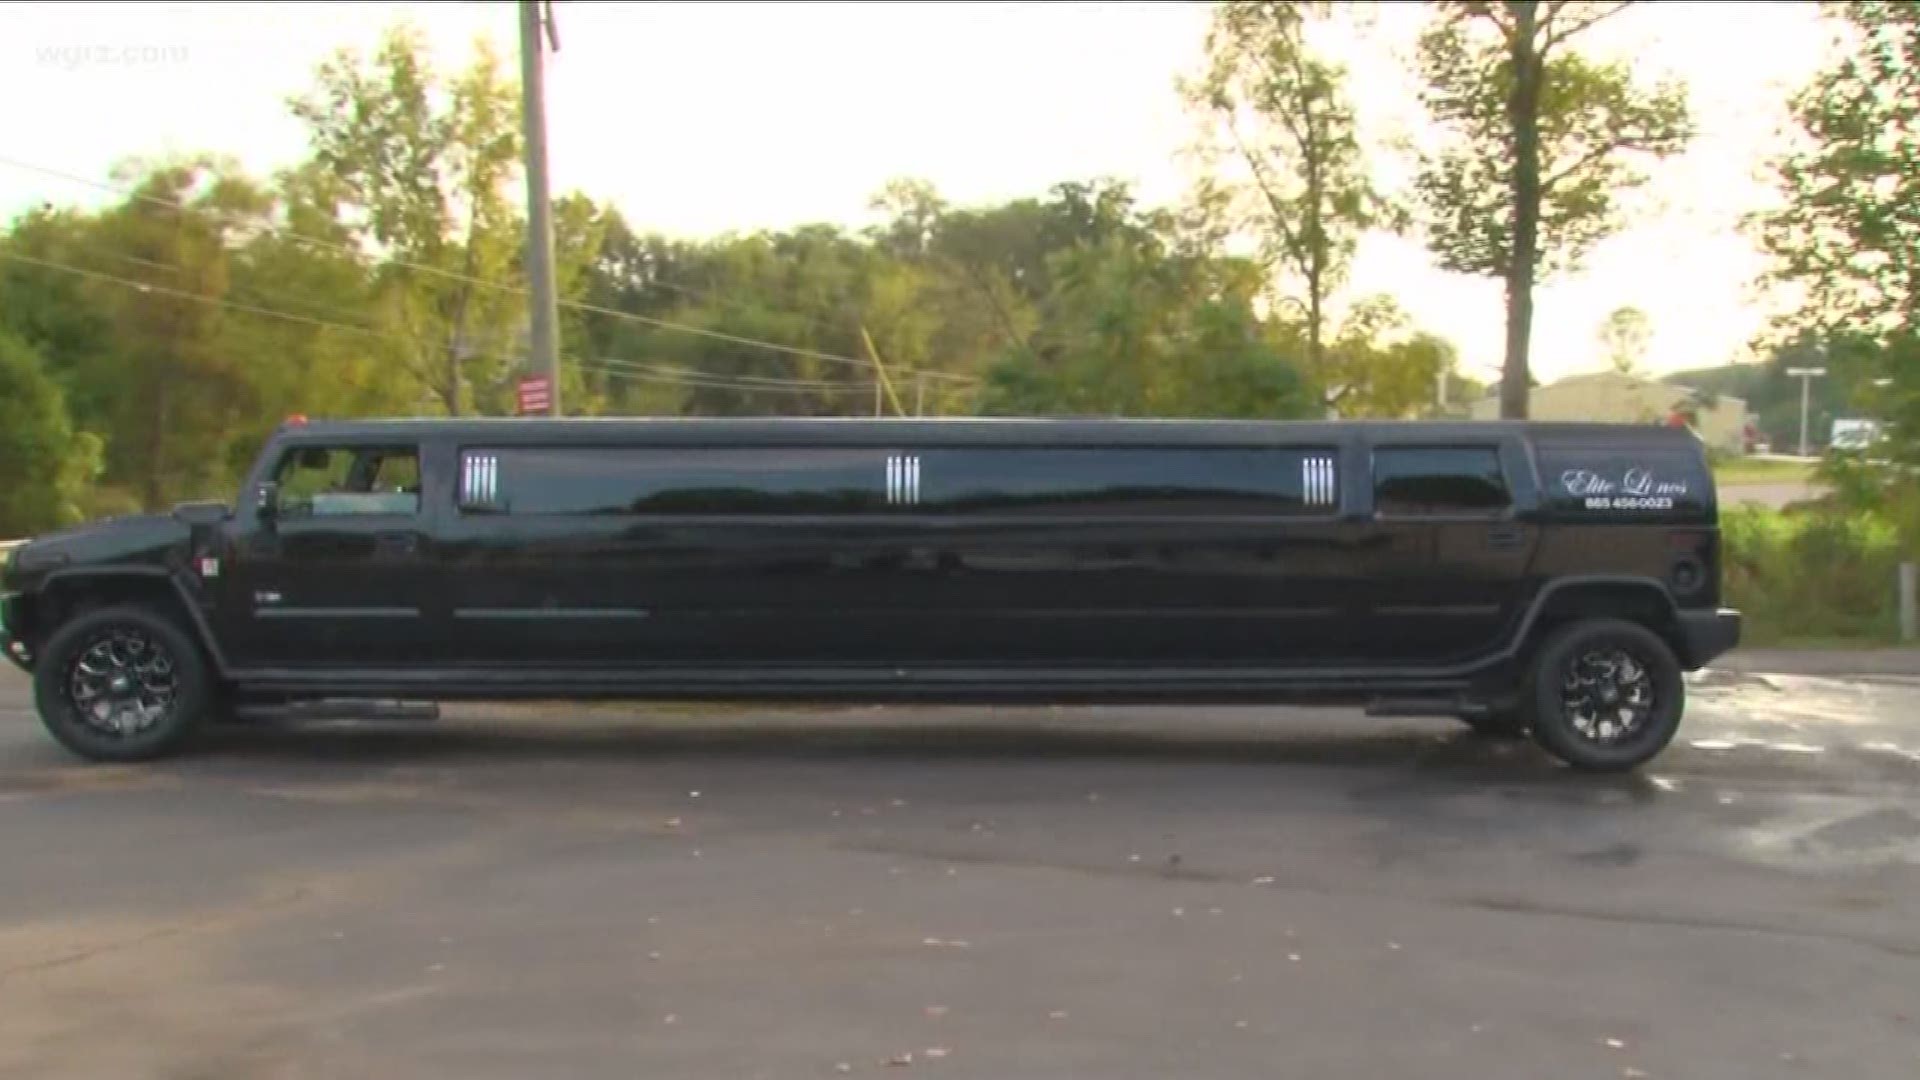 The state Senate approved new safety regulations for limousines.